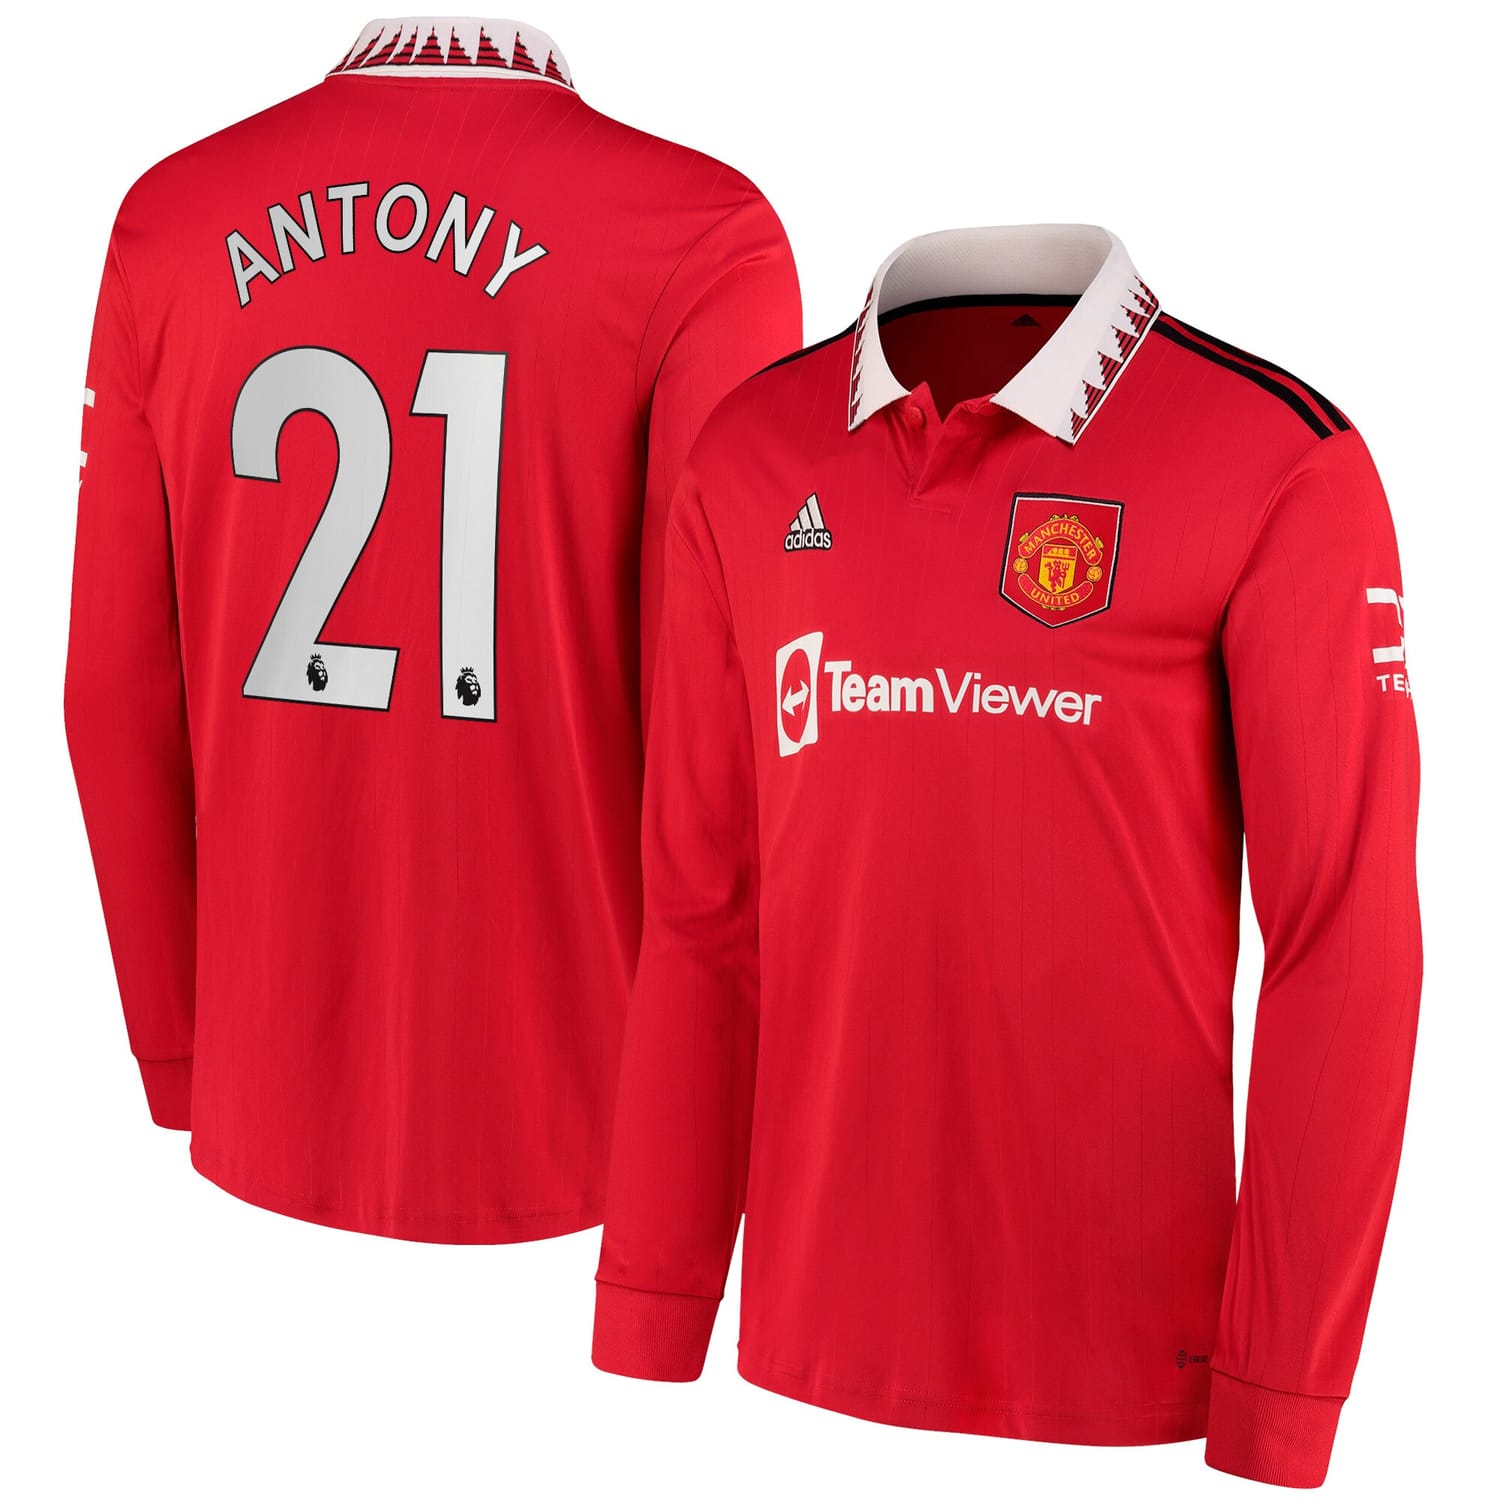 Premier League Manchester United Home Jersey Shirt Long Sleeve 2022-23 player Antony 21 printing for Men